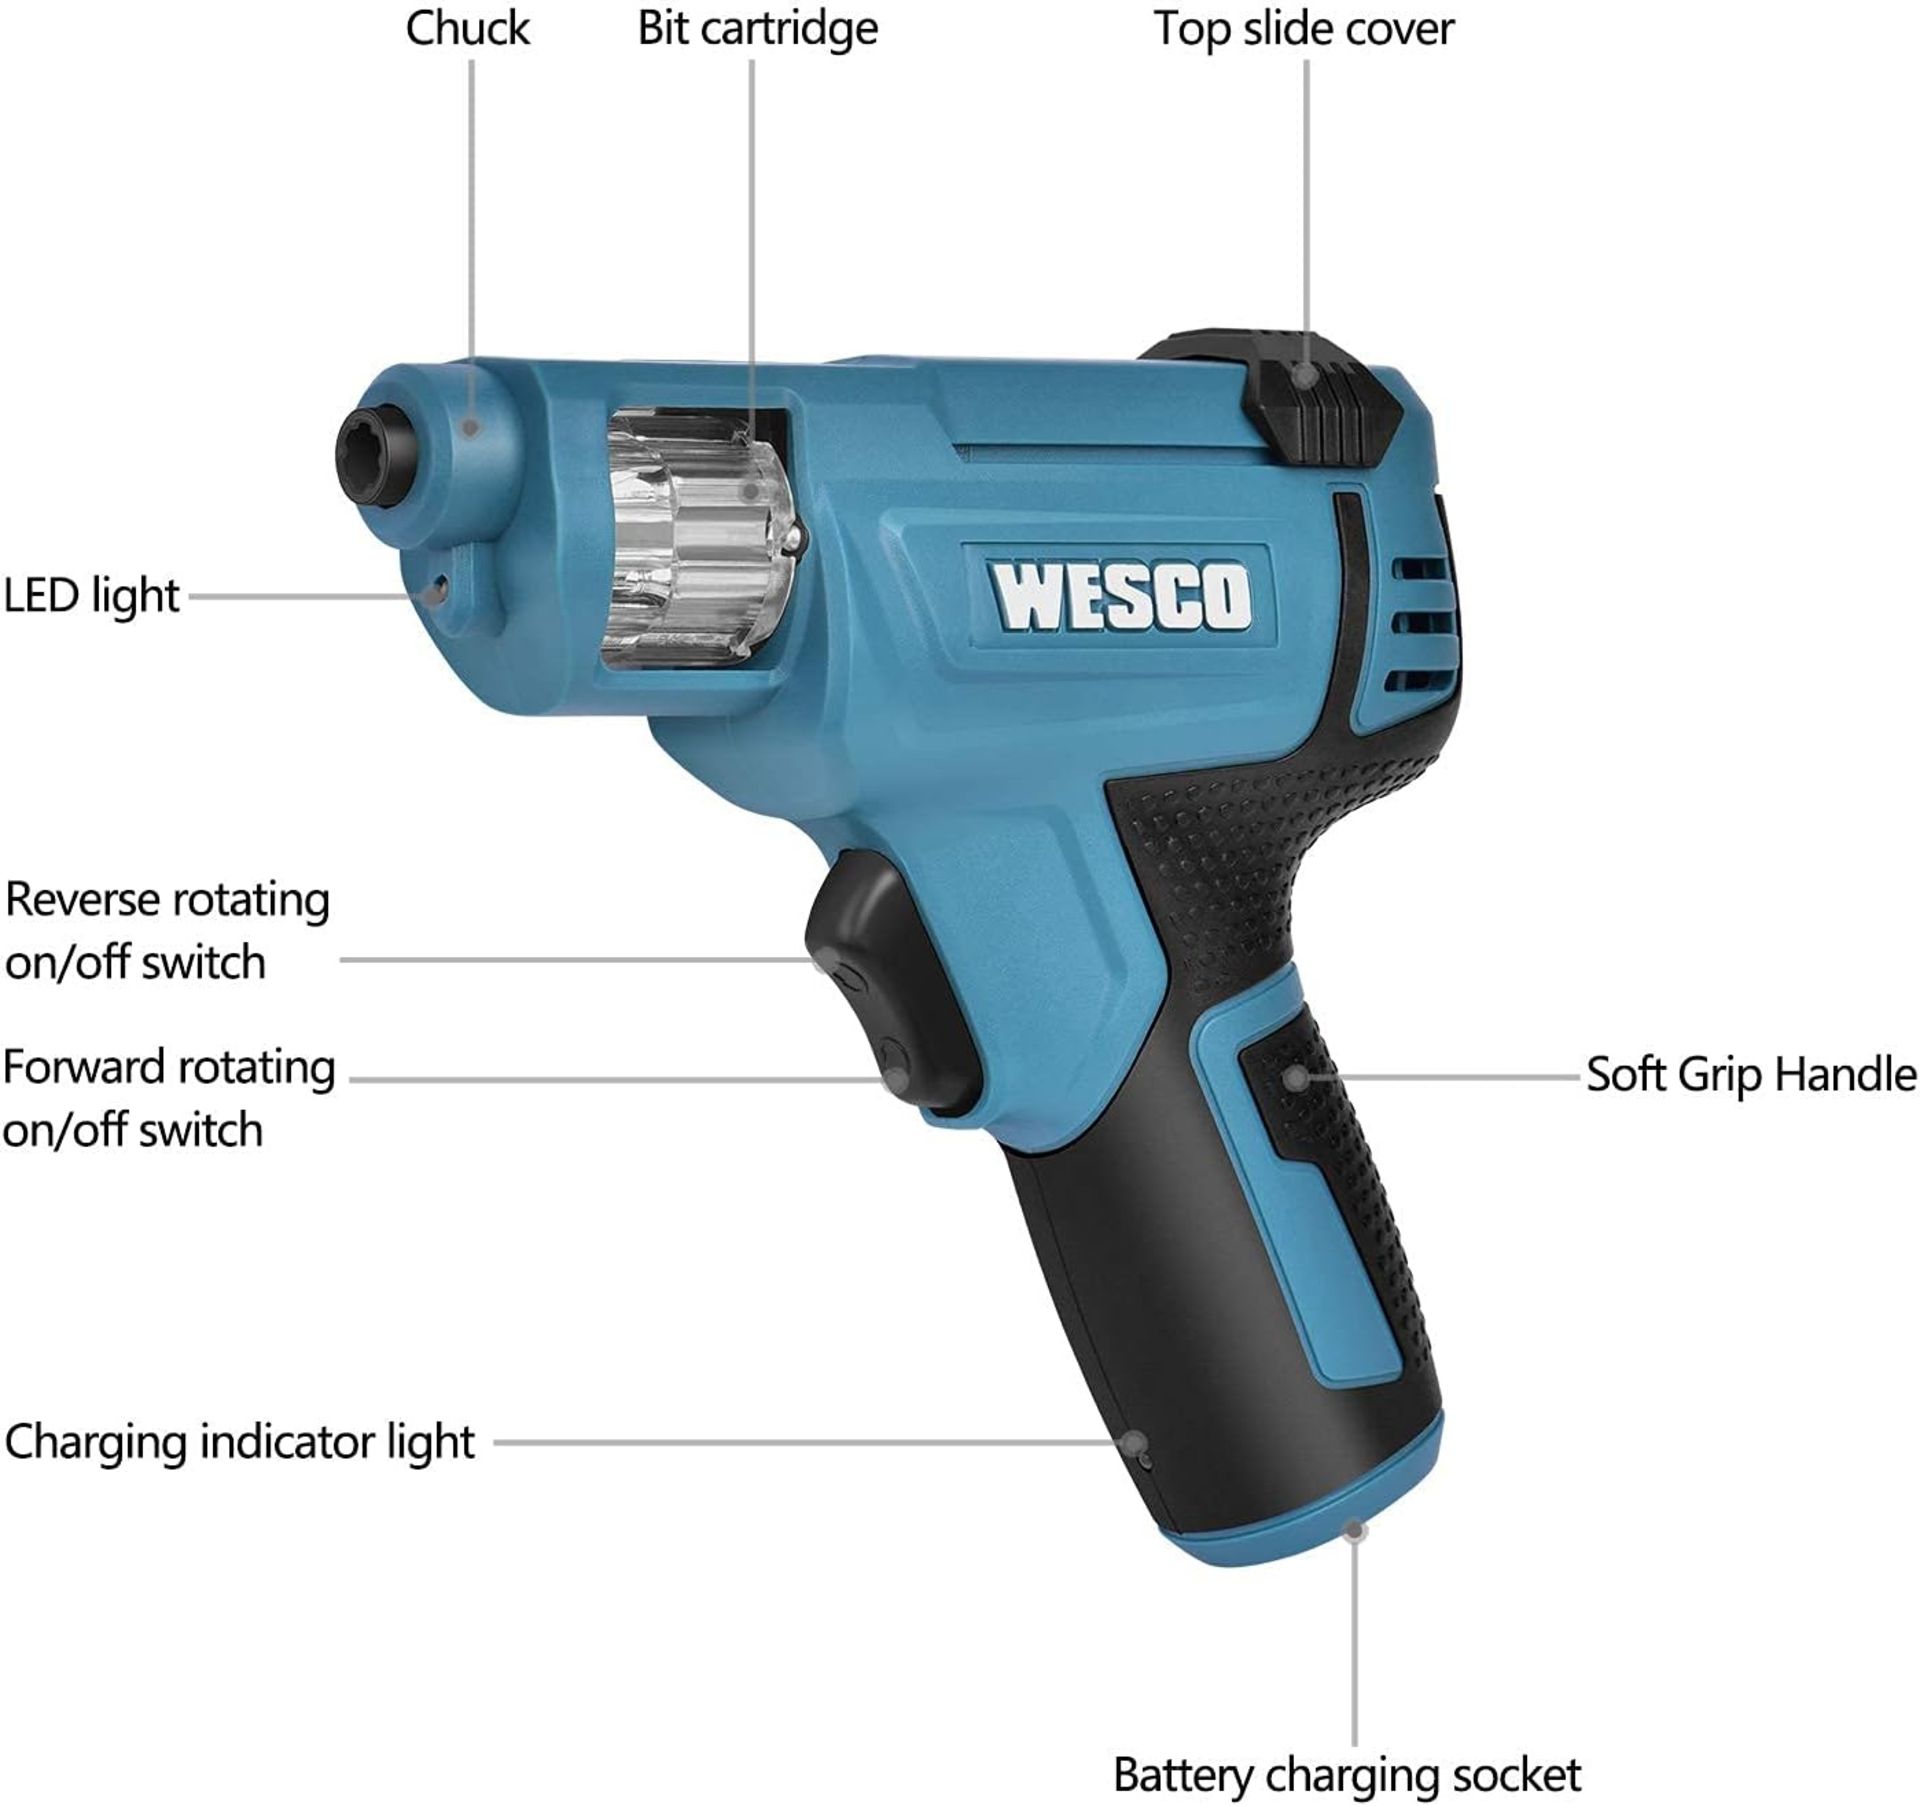 12x NEW & BOXED WESCO 3.6V 1.5Ah Lithium Screwdriver 3.5NM. RRP £30 EACH. Off-Set Head Makes Your - Image 2 of 7